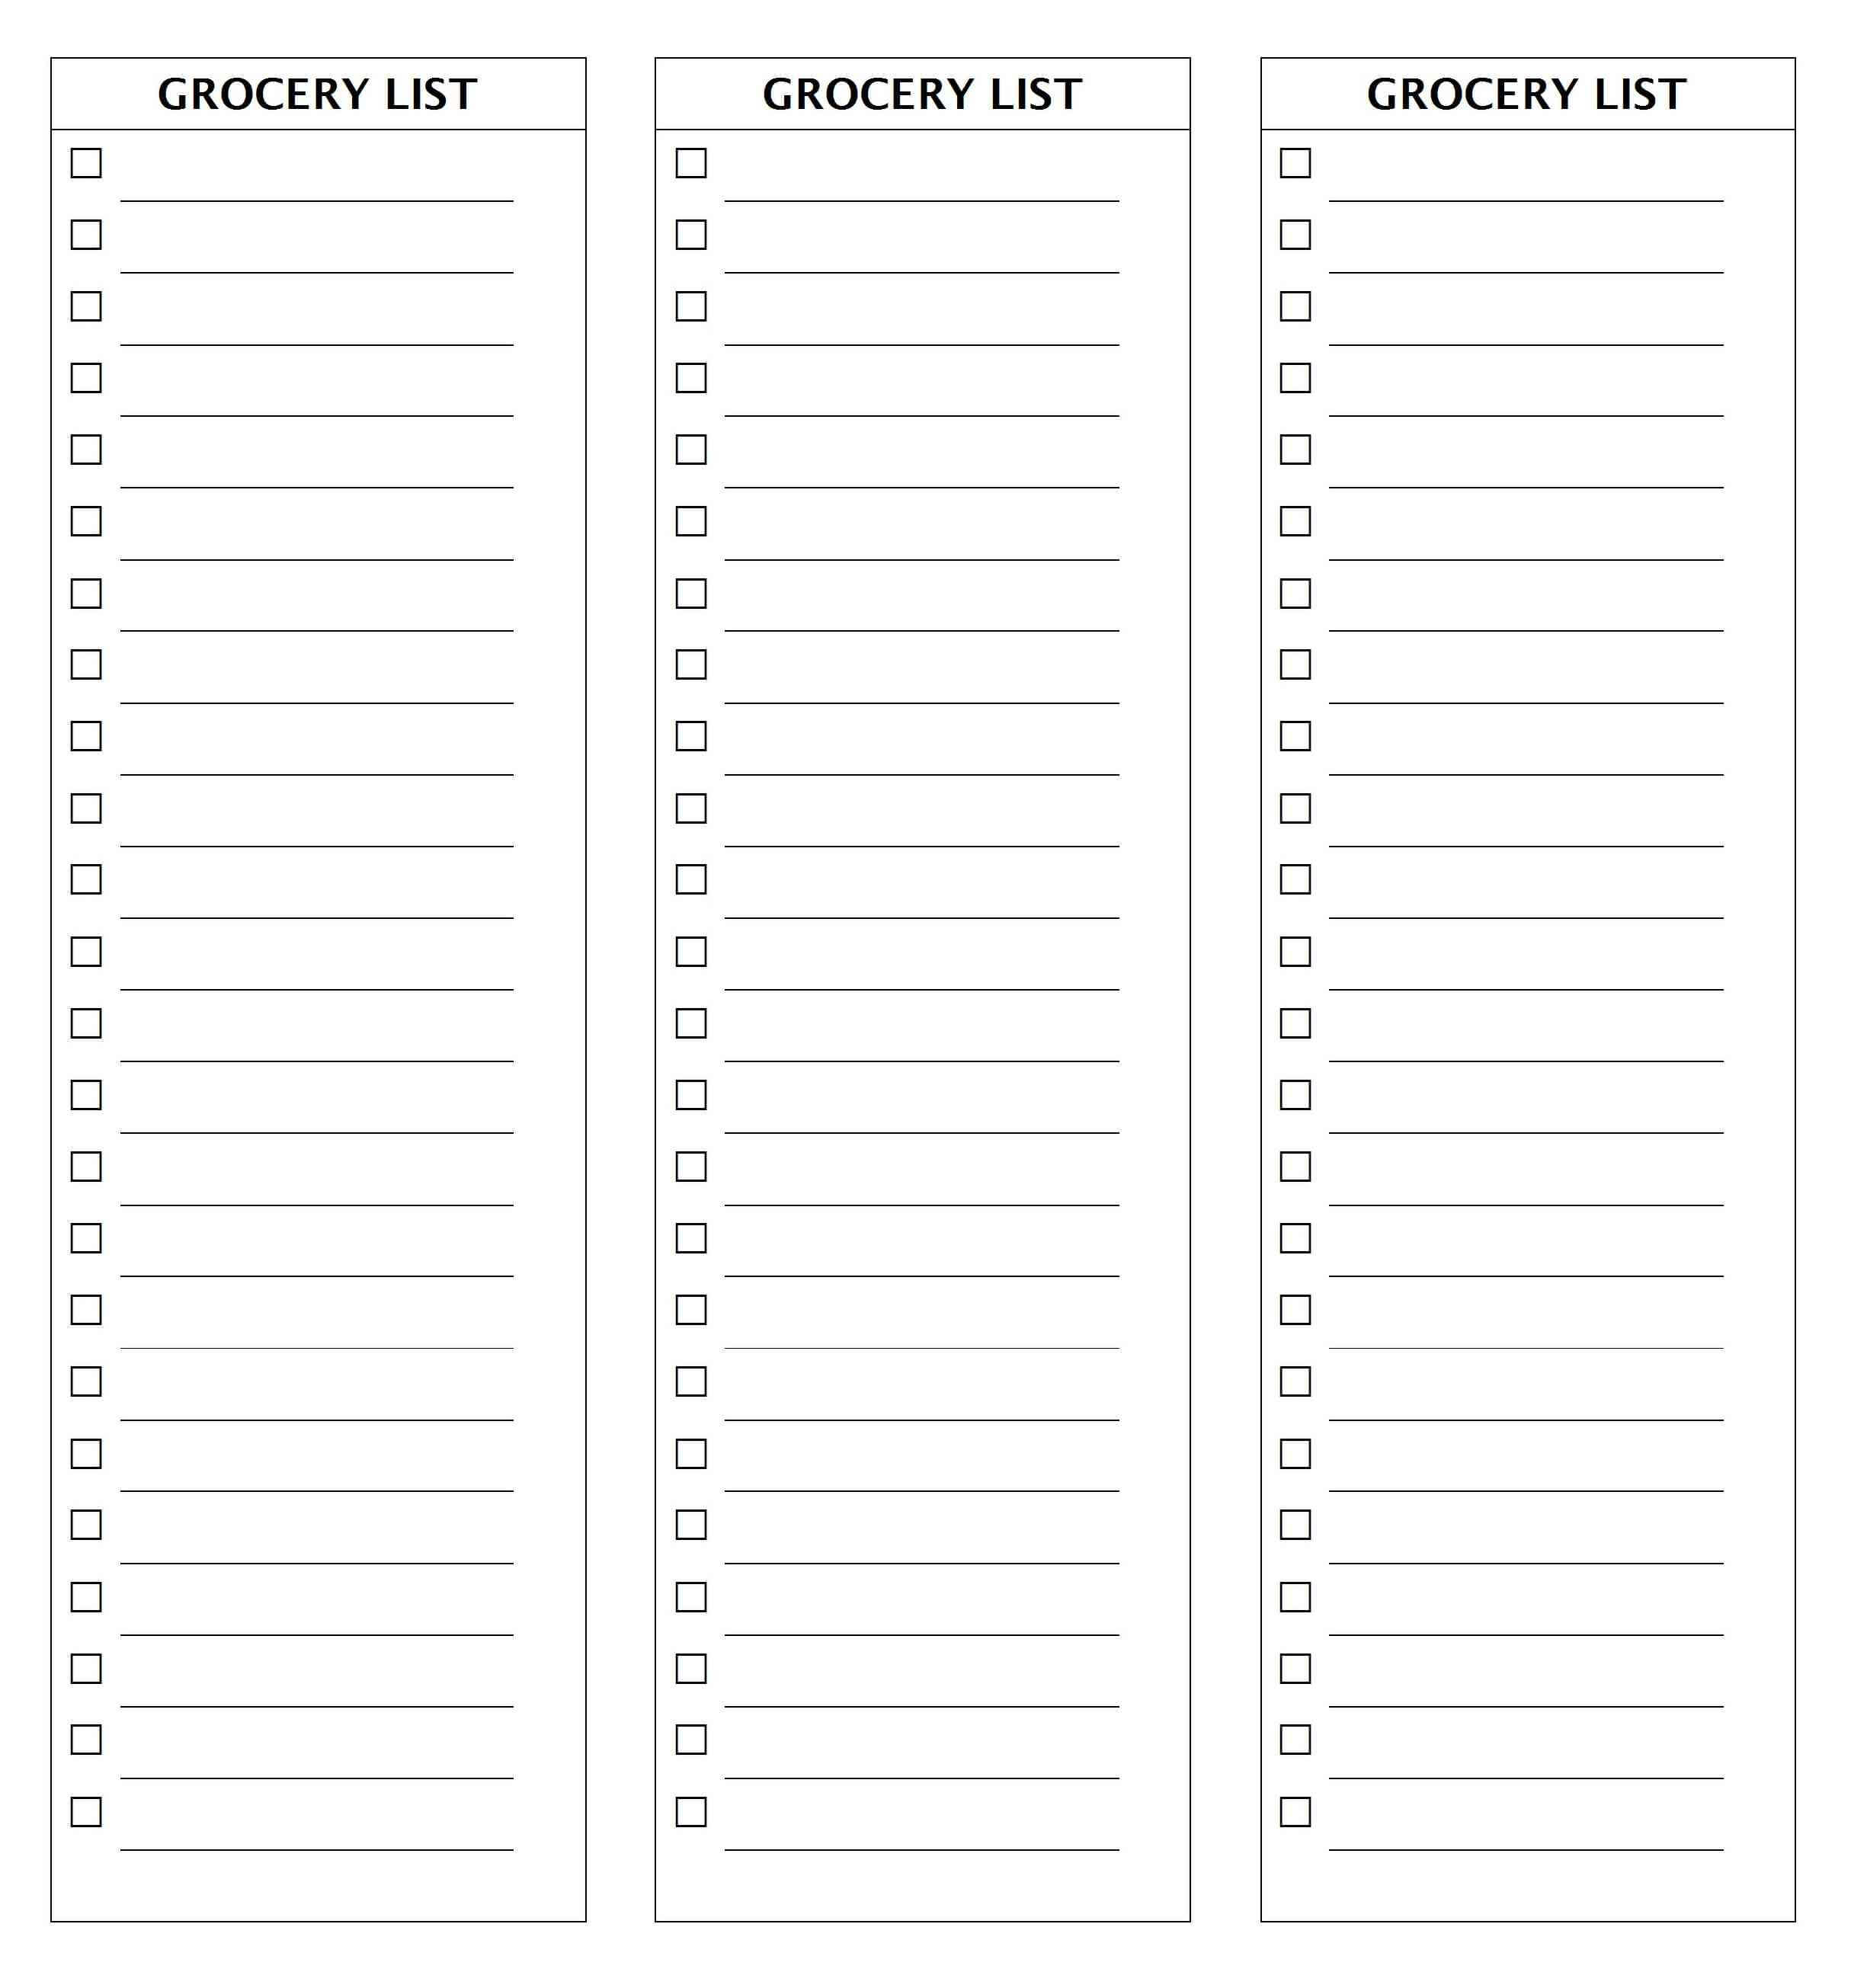 28 Free Printable Grocery List Templates | Kittybabylove With Blank Grocery Shopping List Template